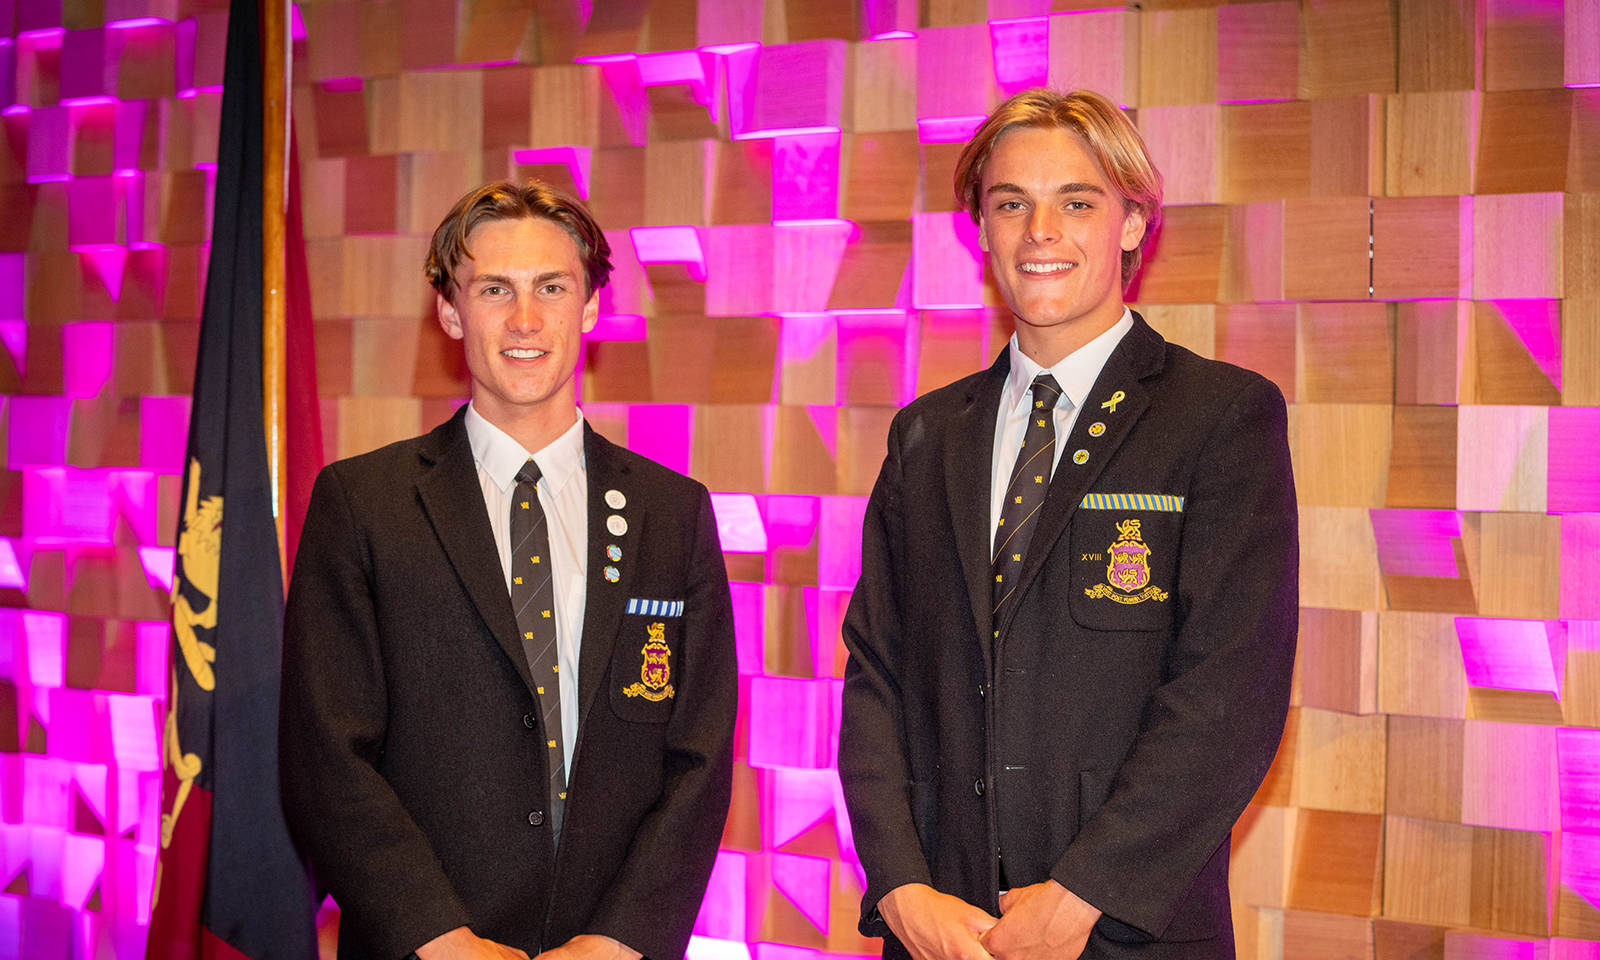 William Zeeman (2022 School Captain) and Sam Banks-Smith (2022 School Vice-Captain) at the Year 11 and 12 Speech Night.